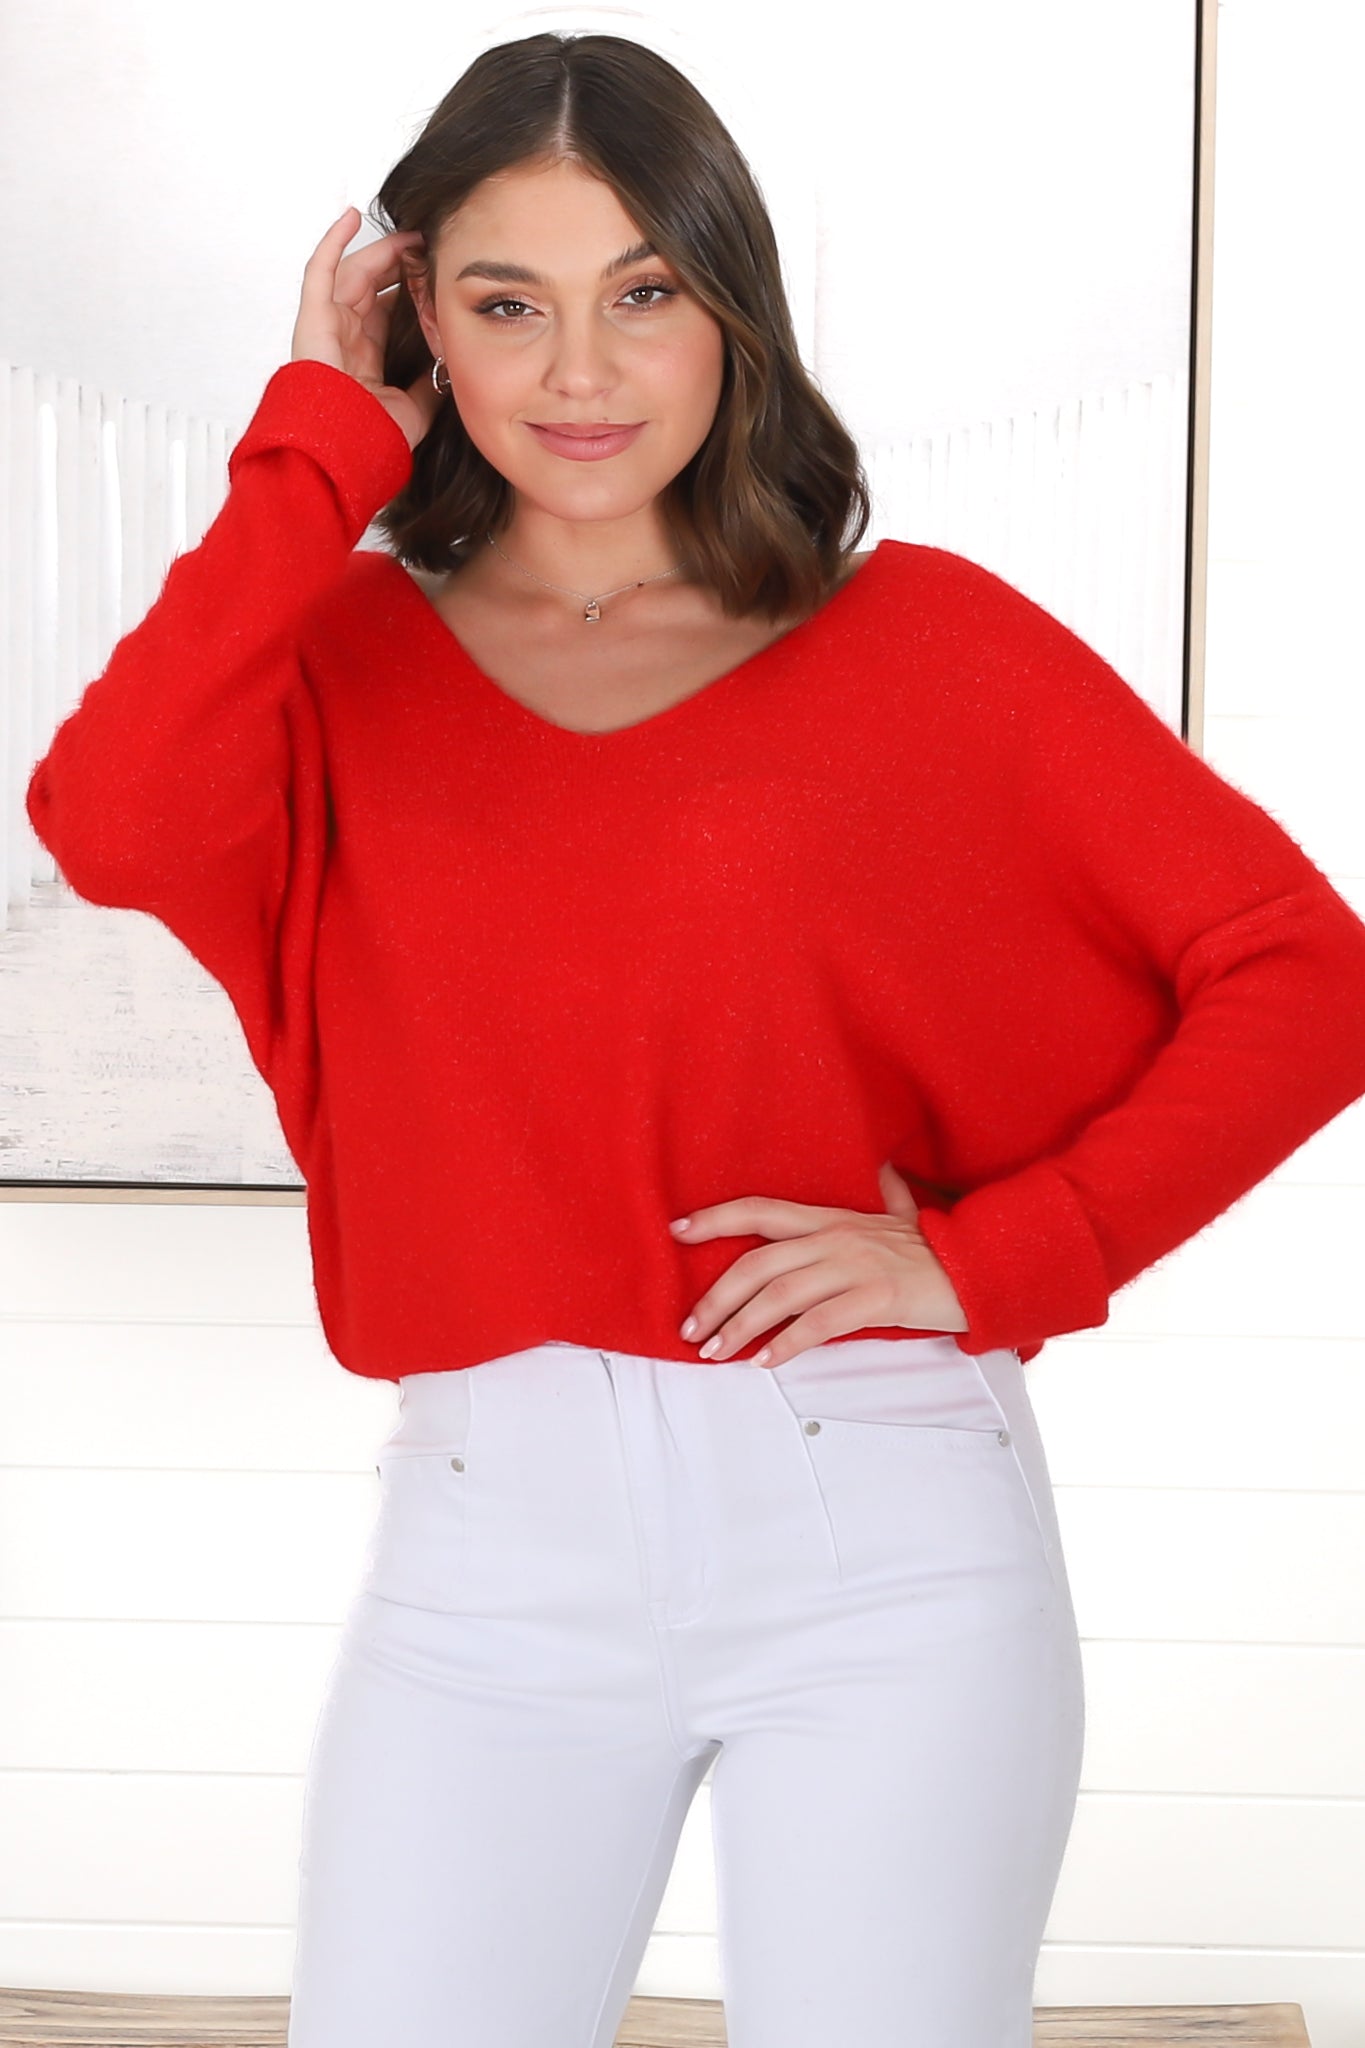 Carol Knit Top - Soft V Neck Batwing Sleeve Knit Top in Red